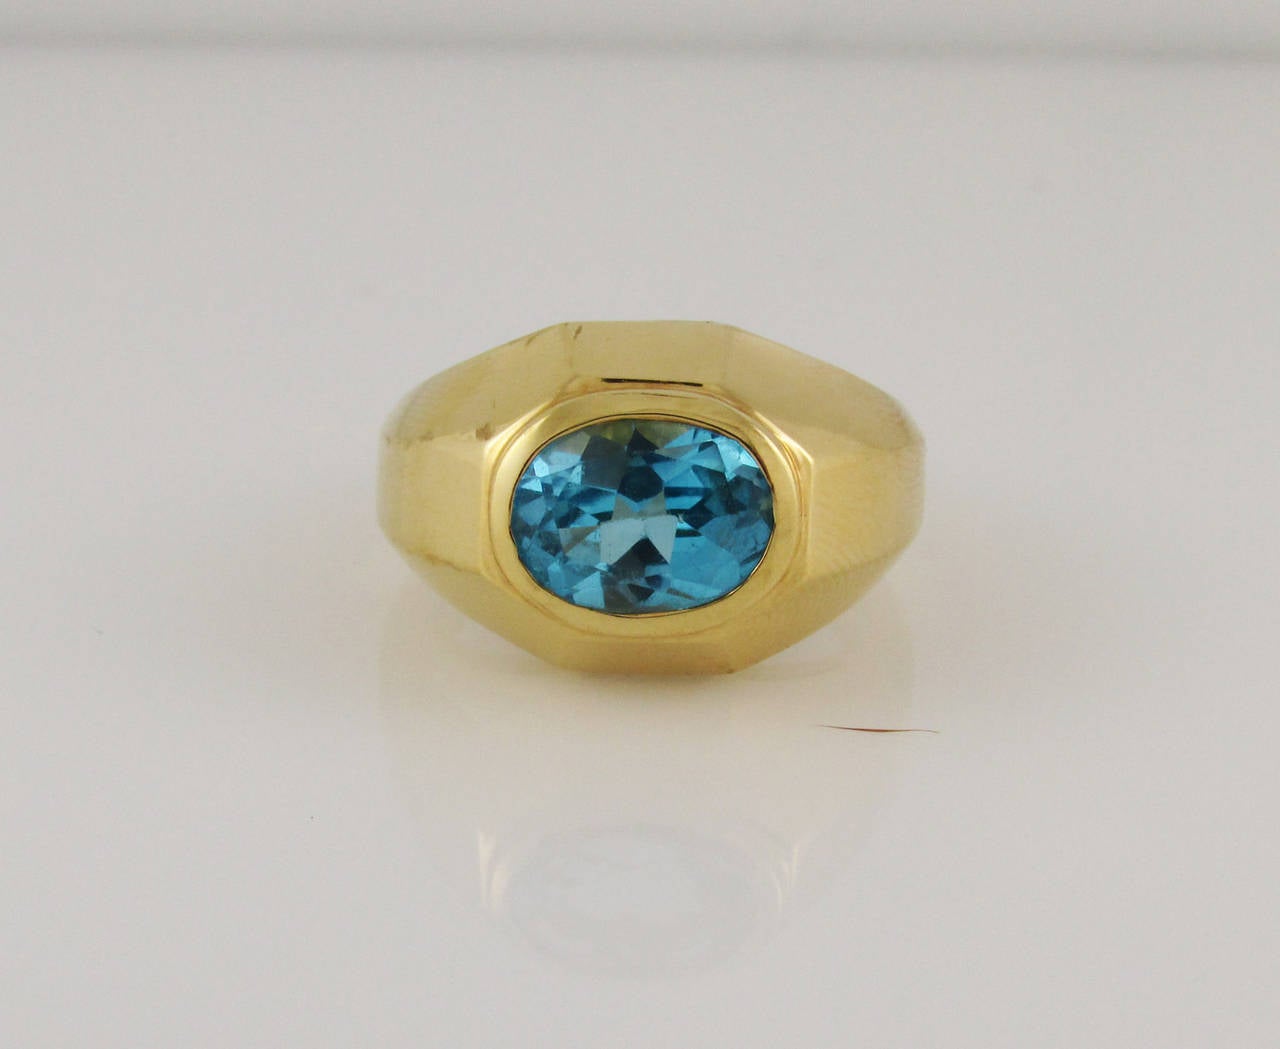 18KT yellow gold and blue topaz ring designed as as a faceted domed mounting set at center with a faceted oval blue topaz. Finger size 7.  Signed Bvlgari.